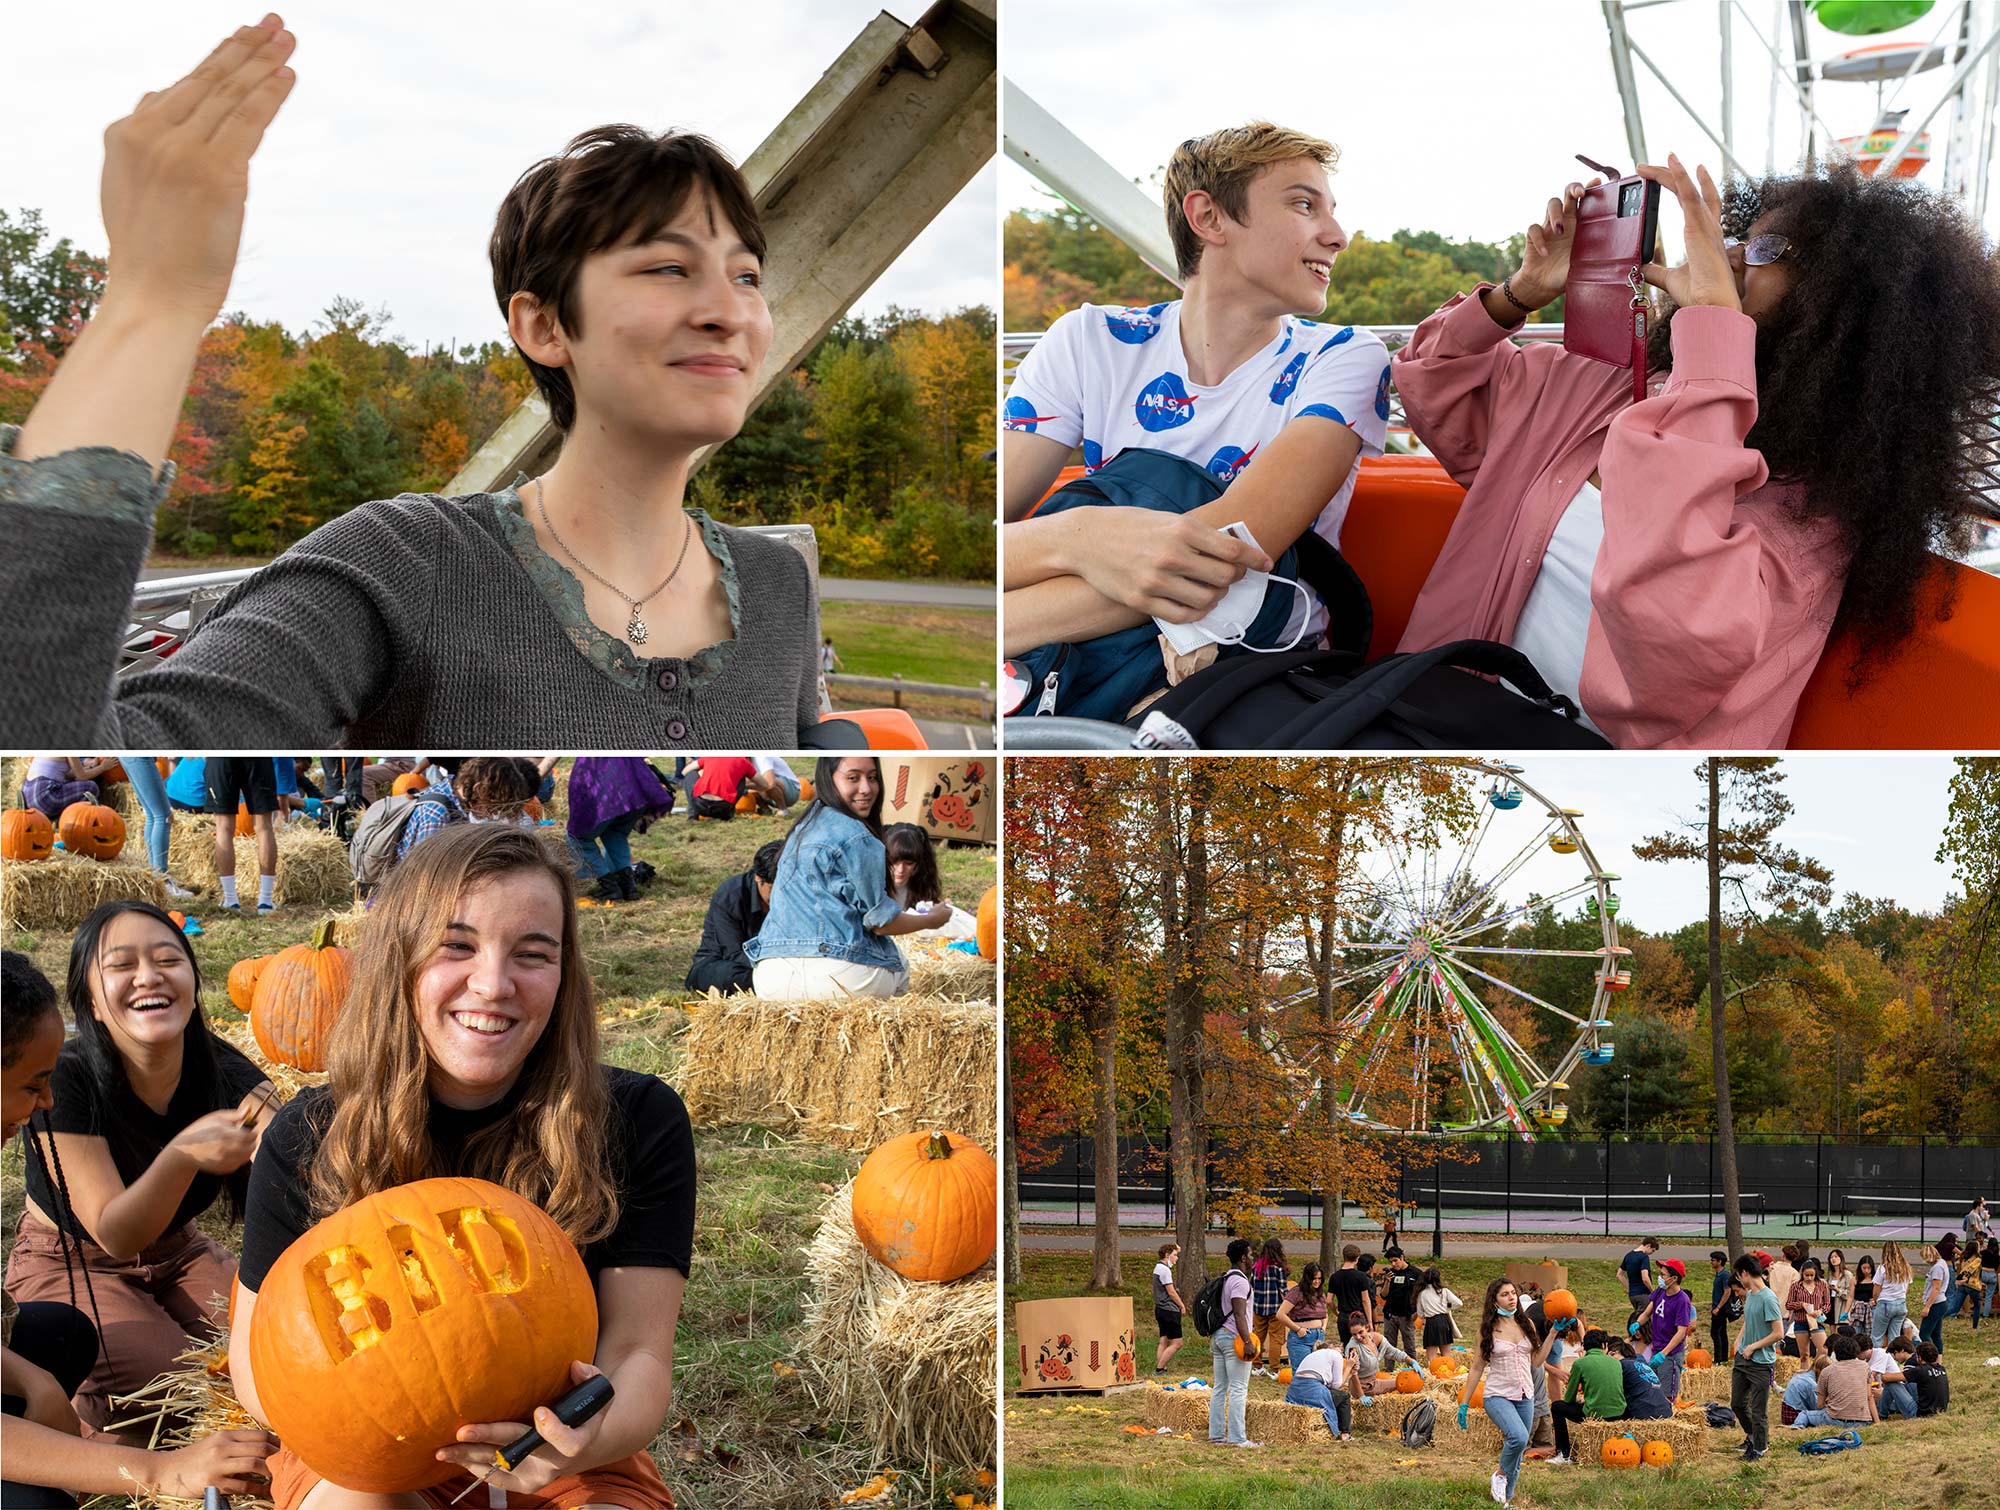 Pumpkin carving and riding the ferris wheel were two activities at the bicentennial party